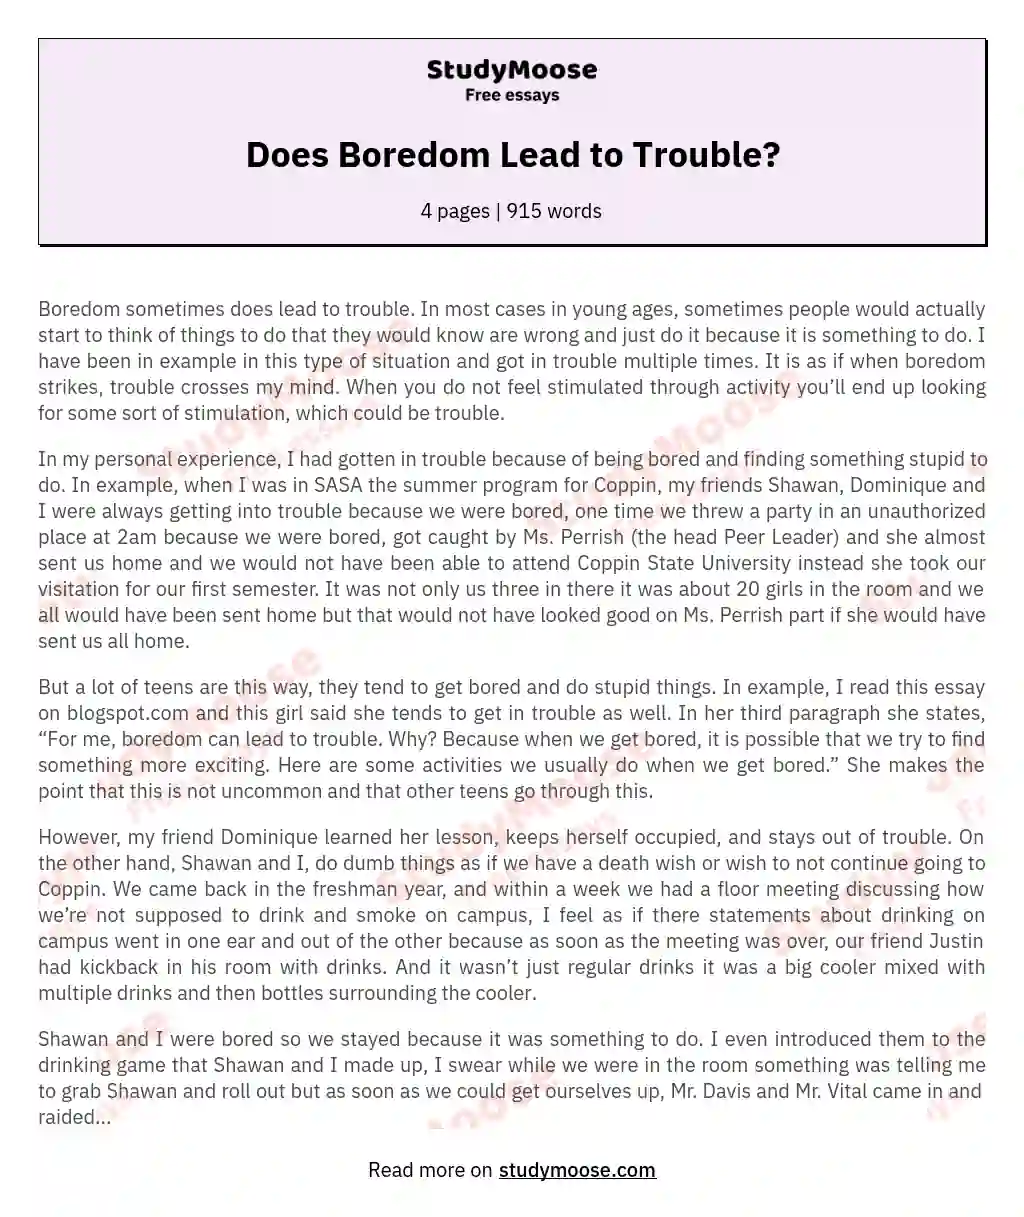 Does Boredom Lead to Trouble? essay